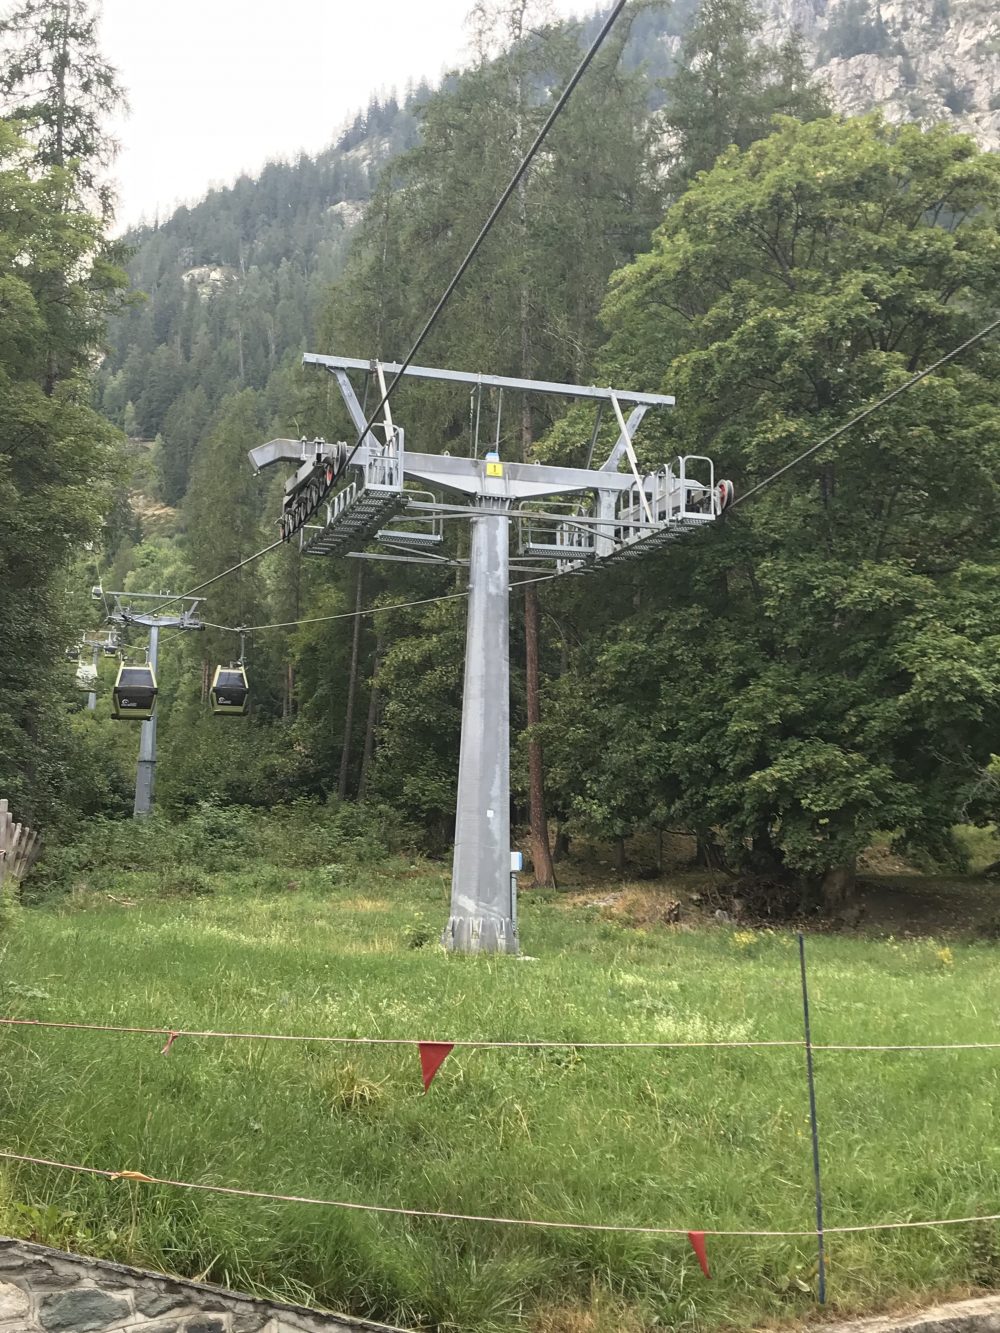 We will have to wait another day to take up the gondola. Photo: The-Ski-Guru- Dolonne gondola. Our summer in the mountains – one week in Courmayeur.